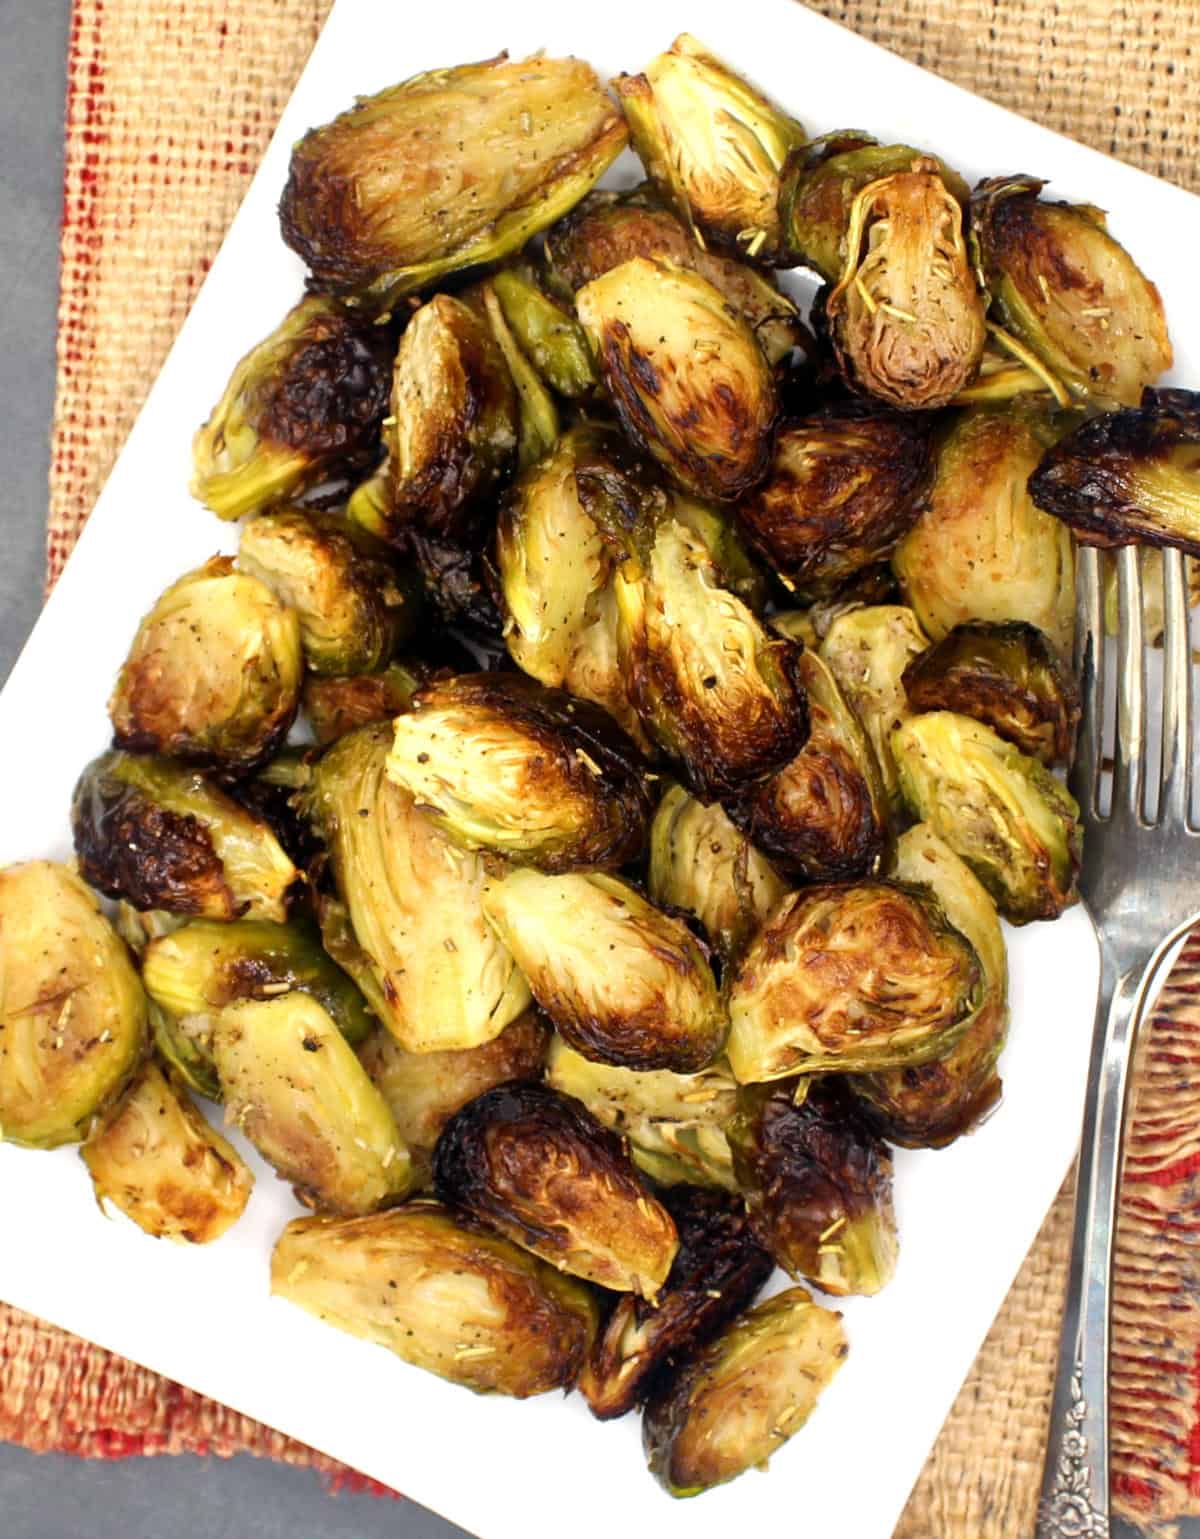 Roasted Brussels sprouts in rectangular white plate with fork.